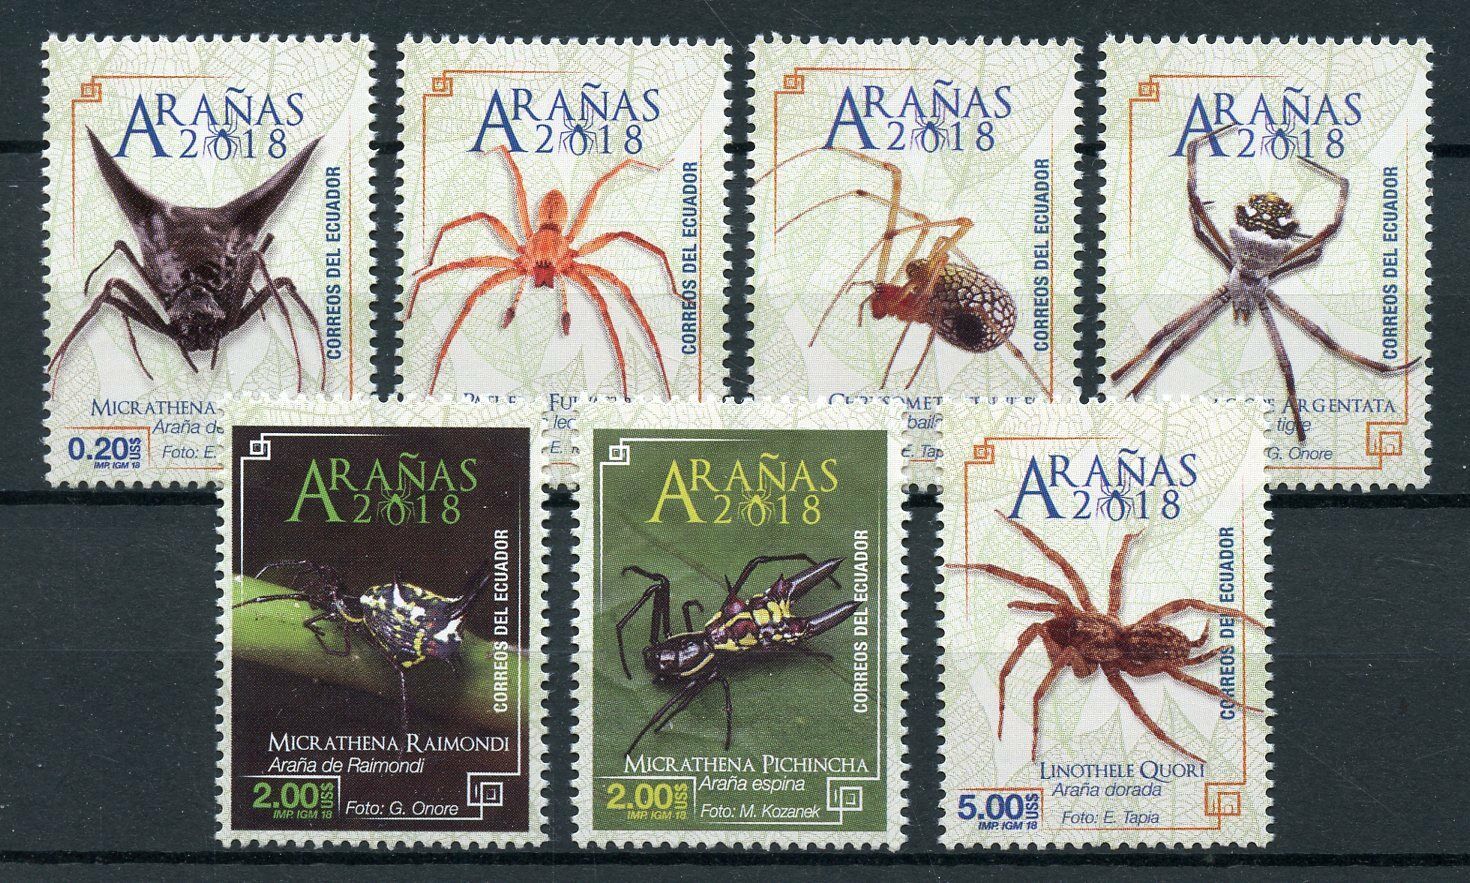 Ecuador 2018 MNH Spiders Aranas 7v Set Spider Insects Stamps